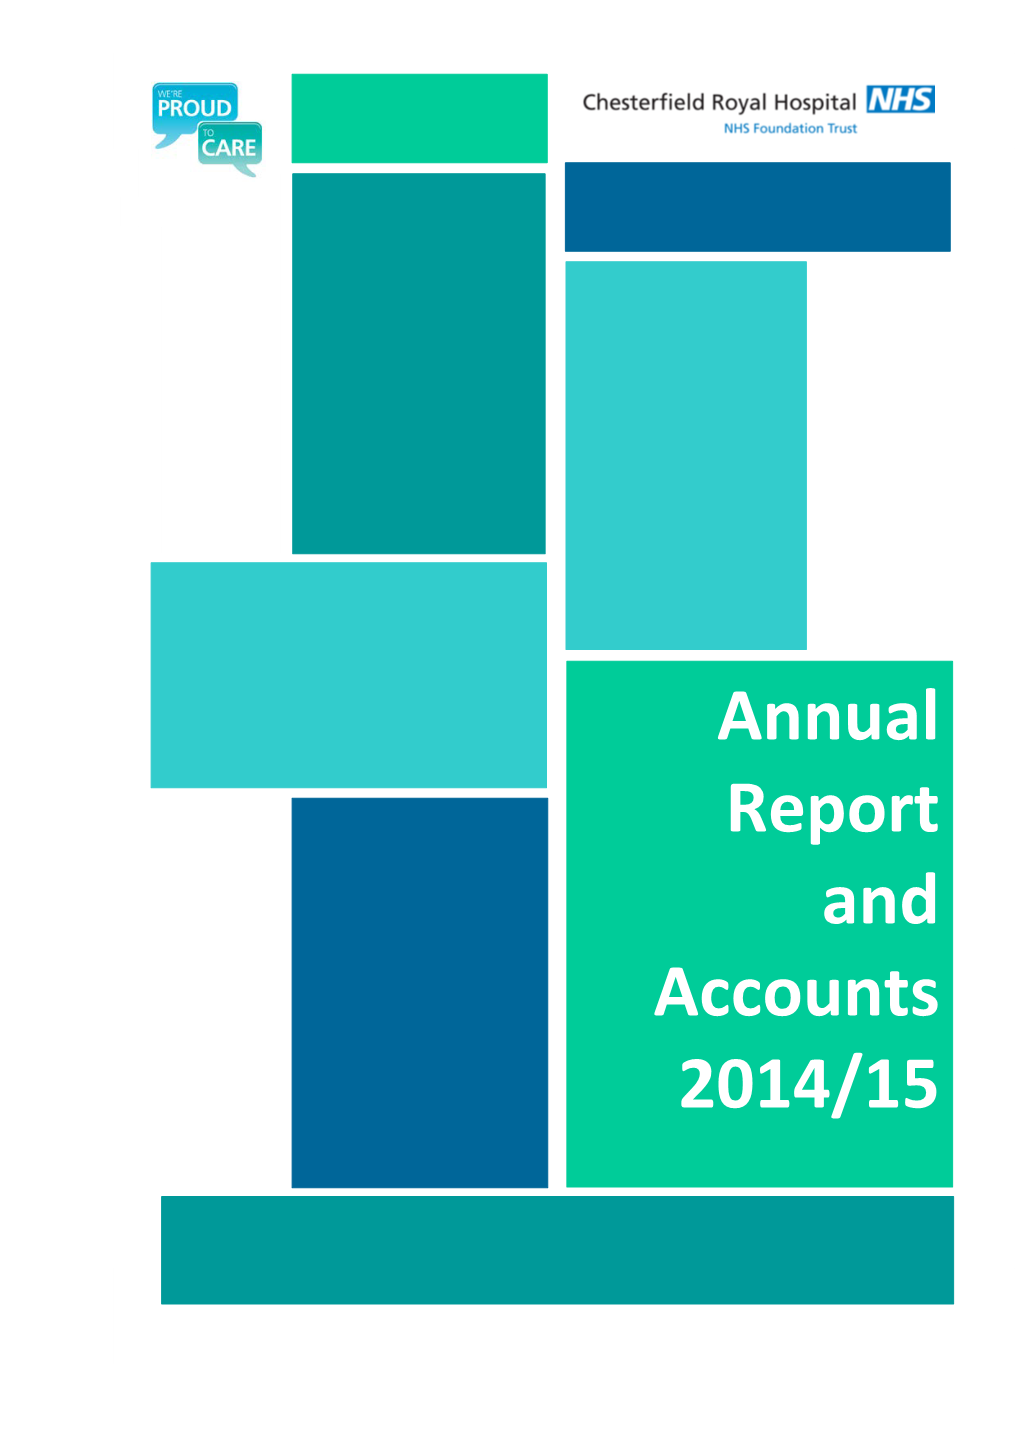 Annual Report and Accounts 2014/15